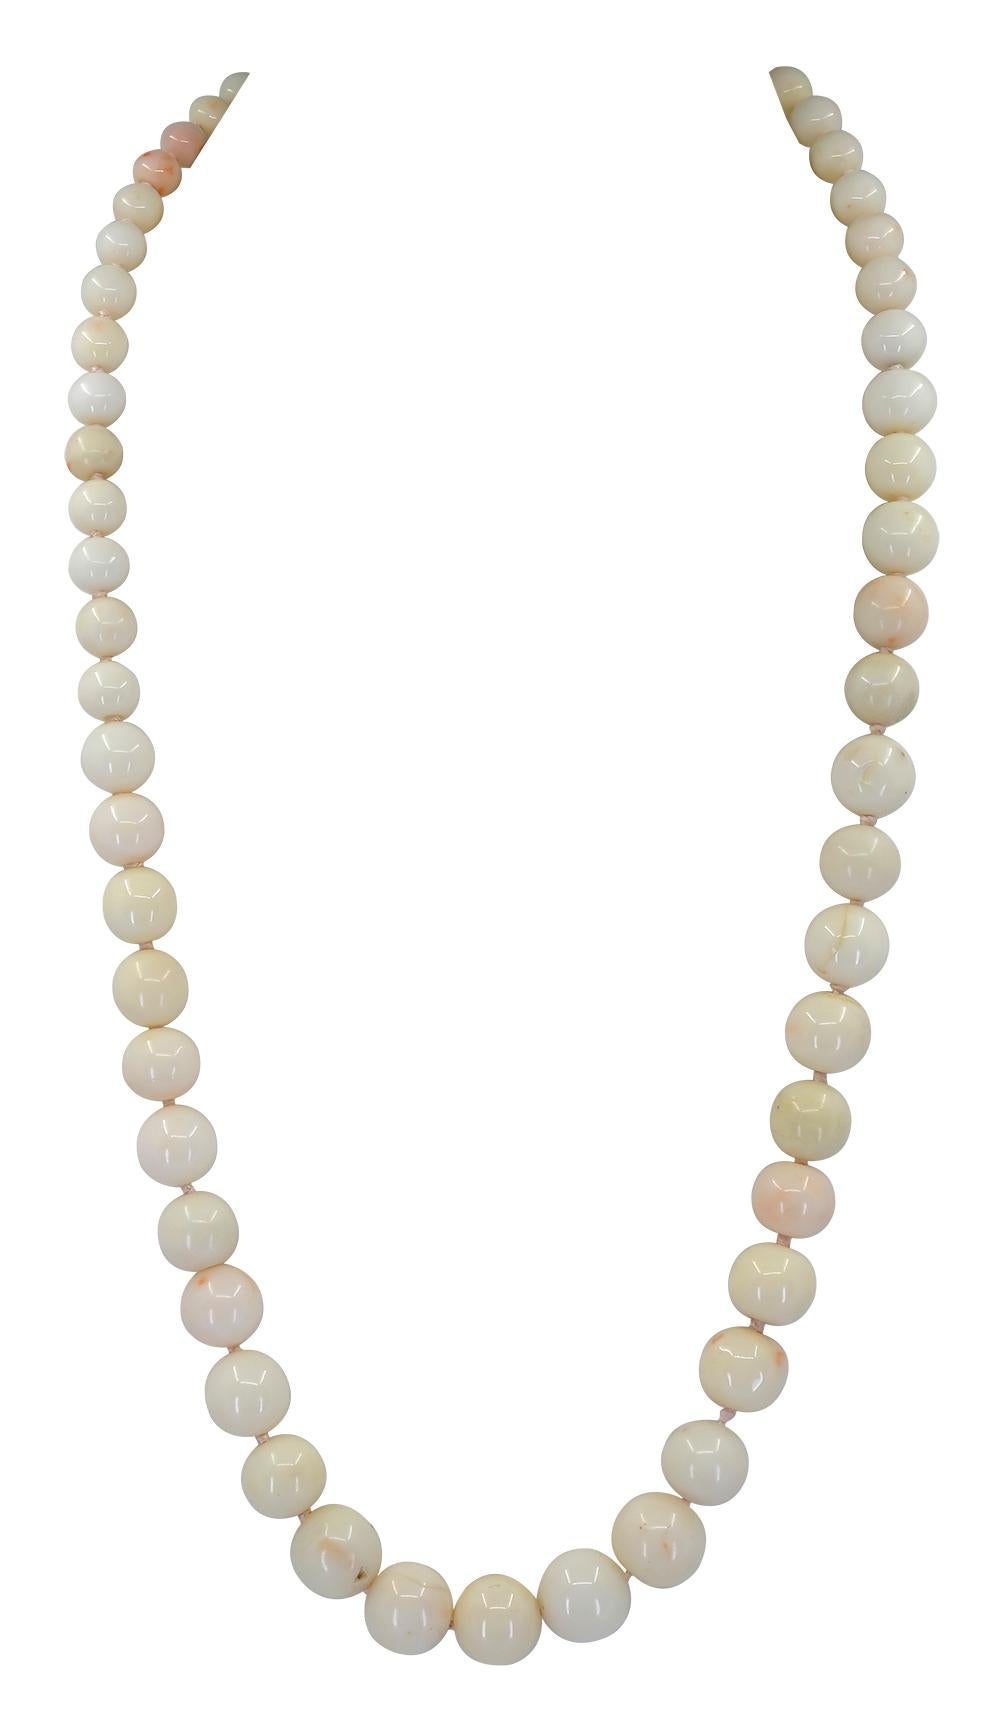 These White Coral beads were purchased as part of an estate before being made into this classic 3 strand necklace. 3 Strands of Graduated White Coral that are comprised of large, round natural, untreated ocean gems that measure from 7mm-13mm each.